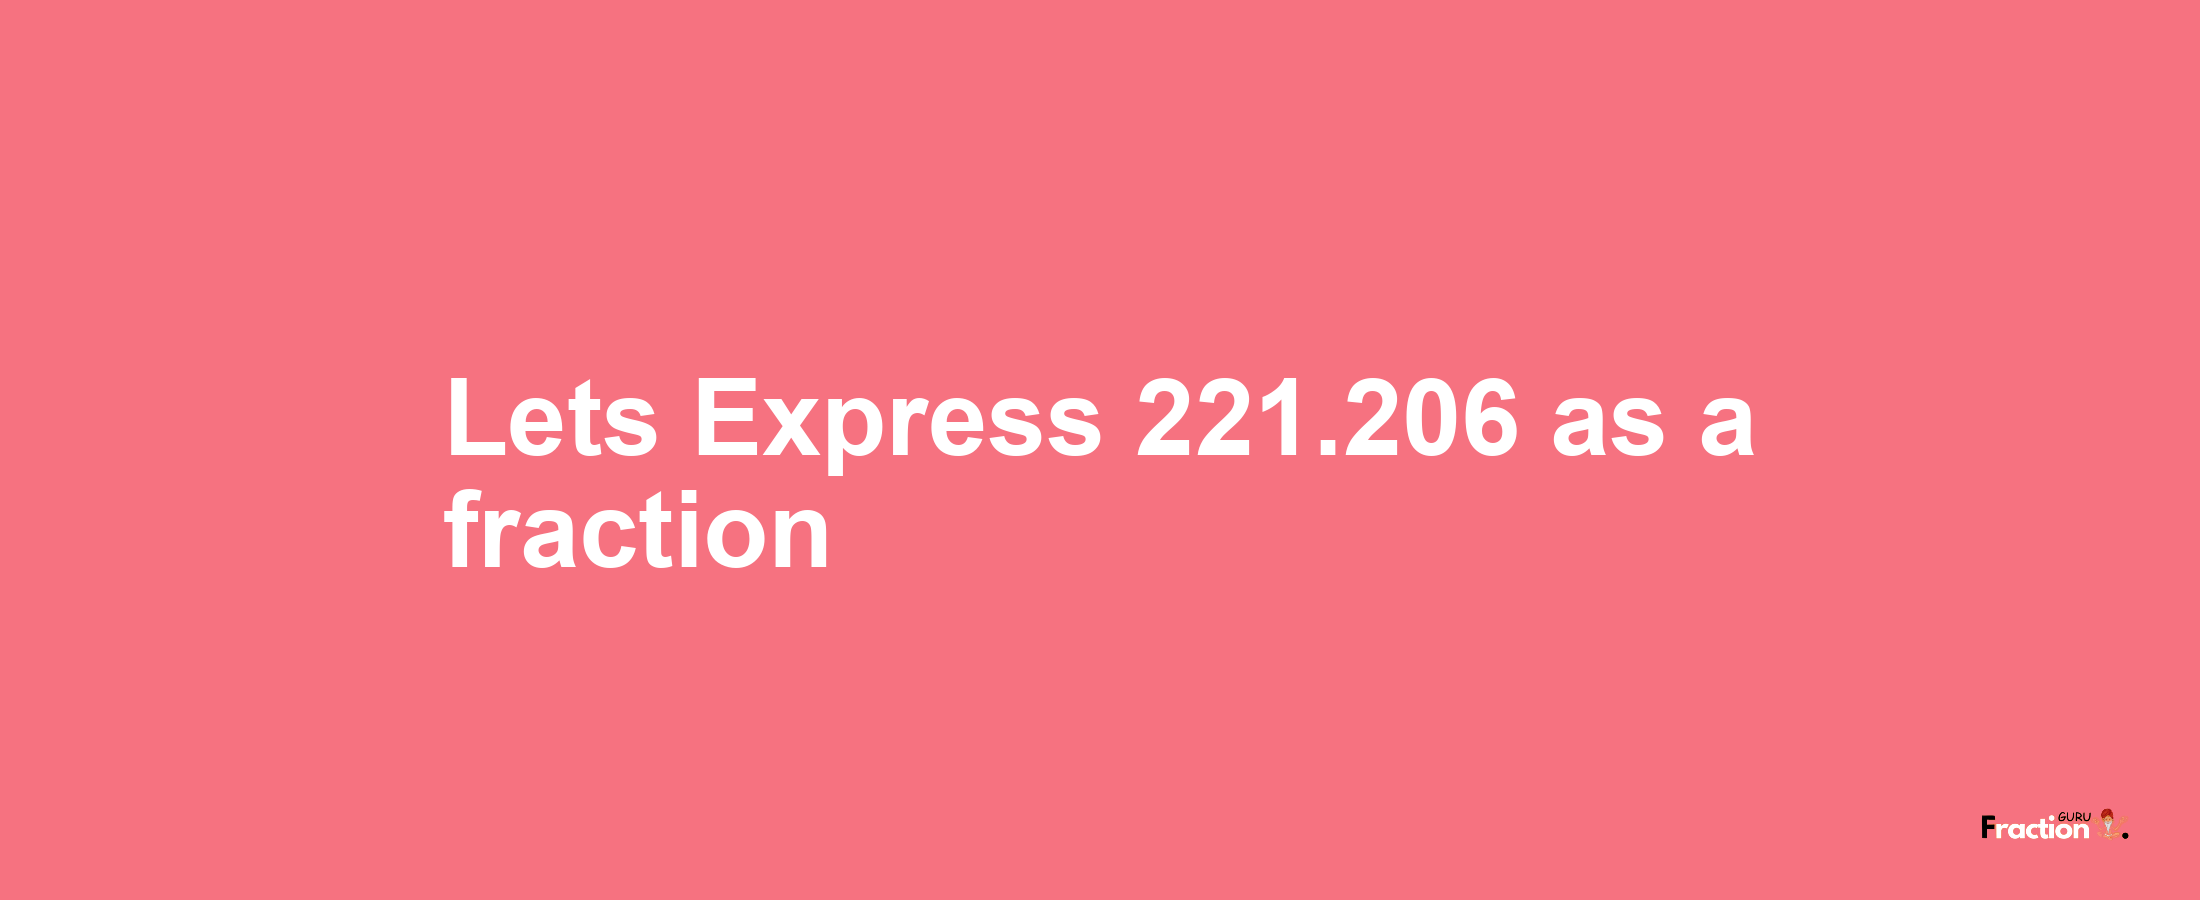 Lets Express 221.206 as afraction